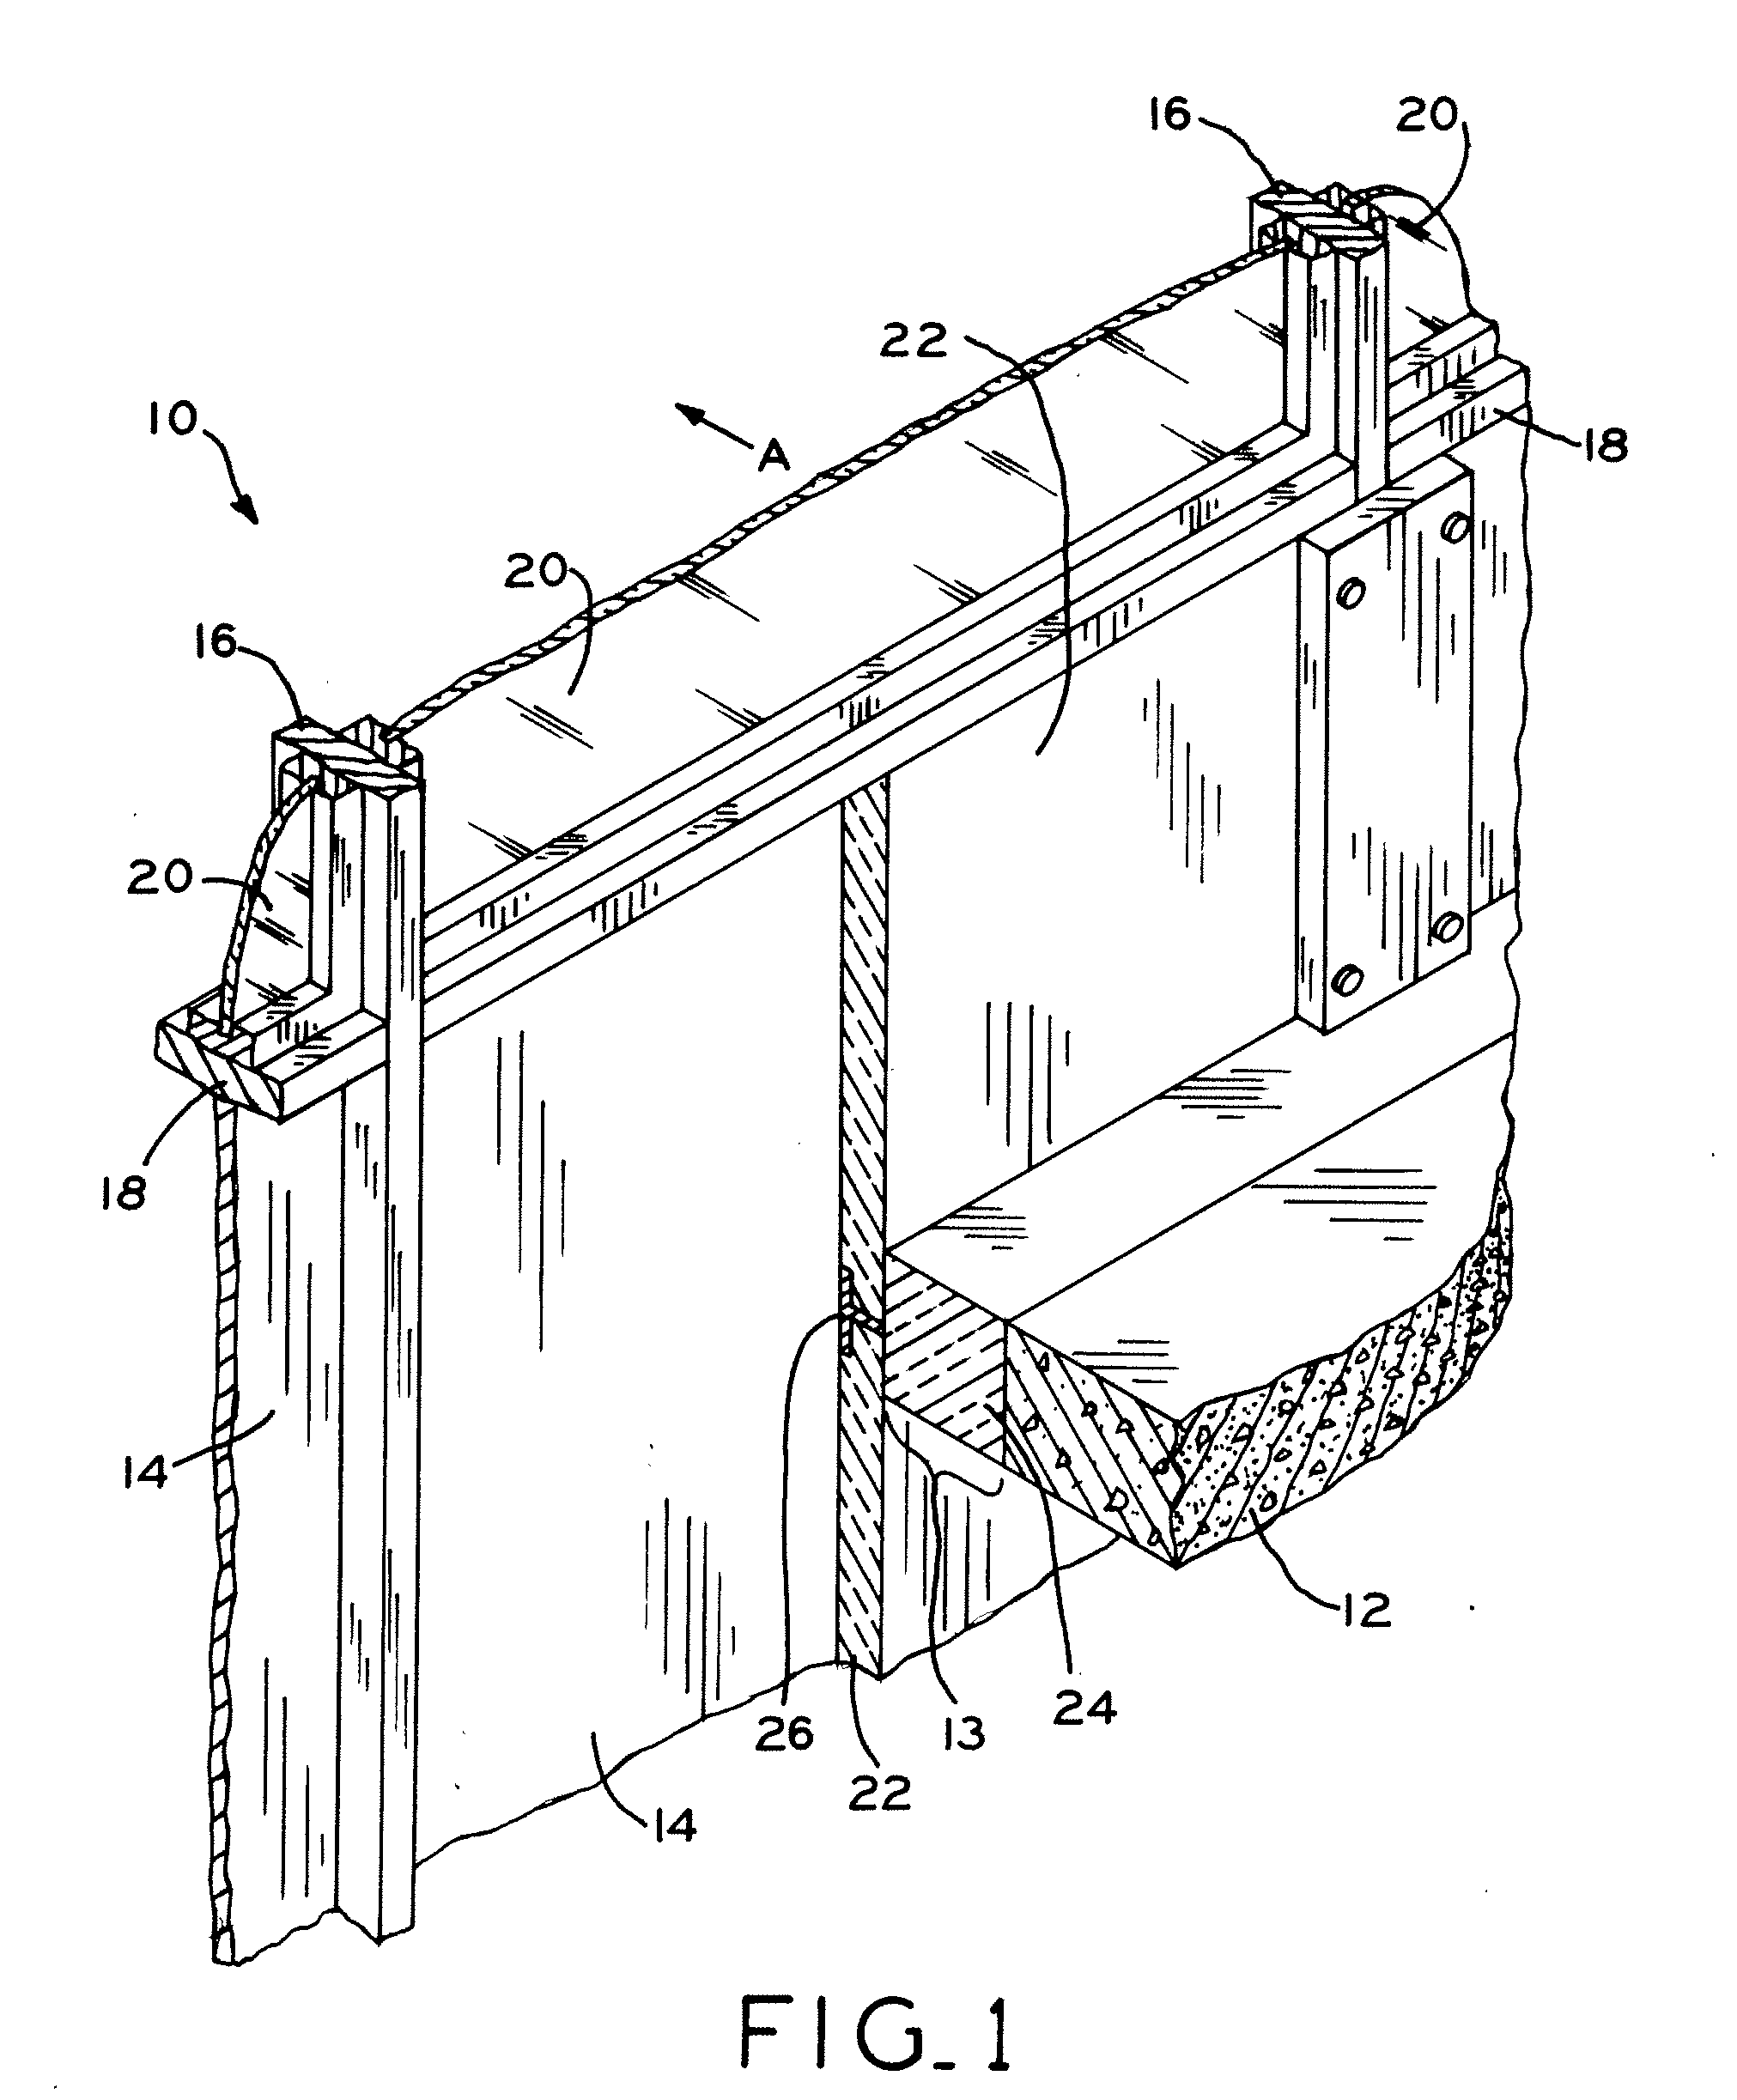 Methods and apparatuses for positioning and securing safing insulation